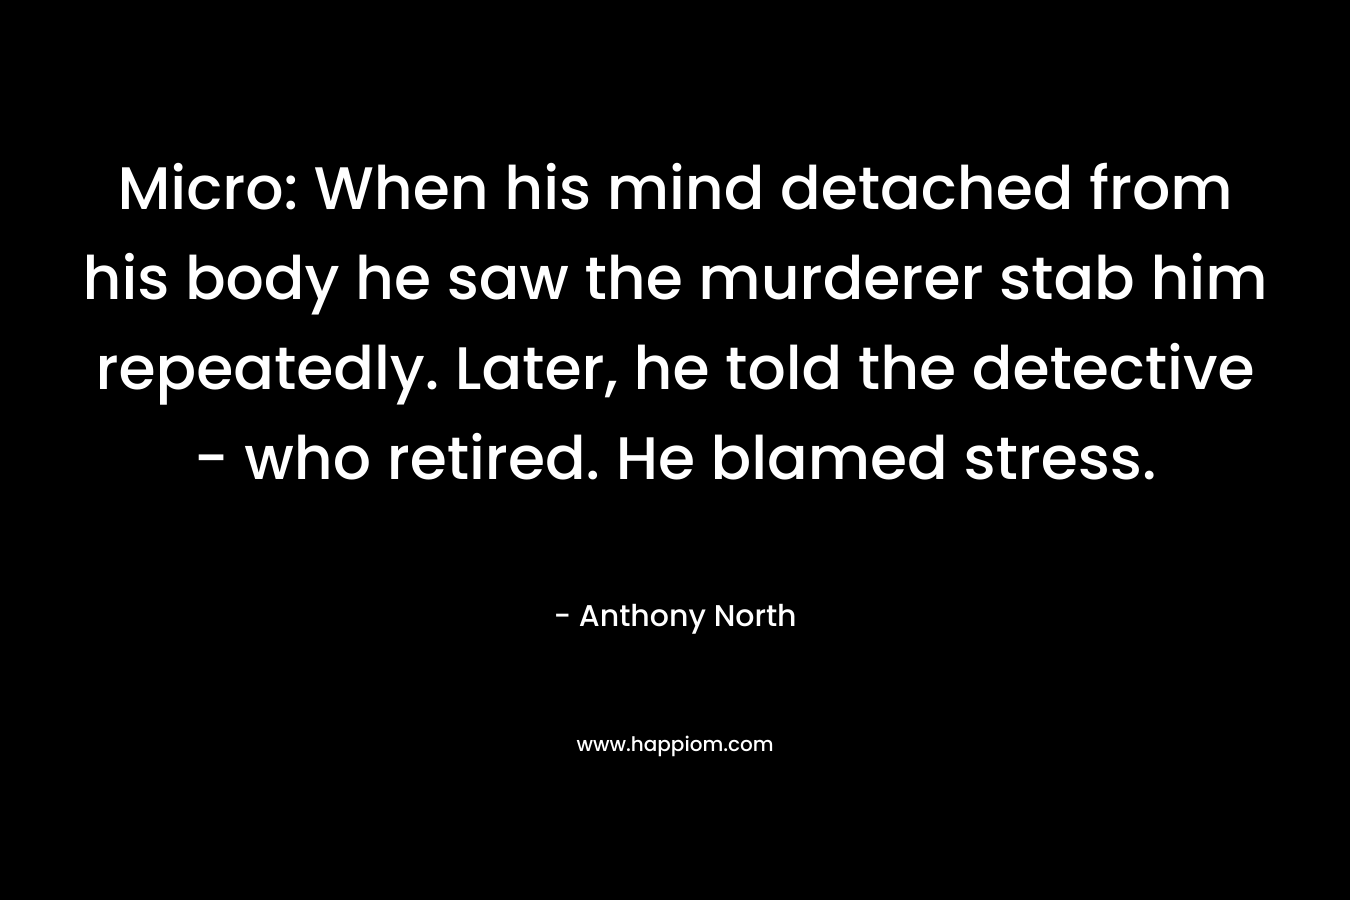 Micro: When his mind detached from his body he saw the murderer stab him repeatedly. Later, he told the detective - who retired. He blamed stress.